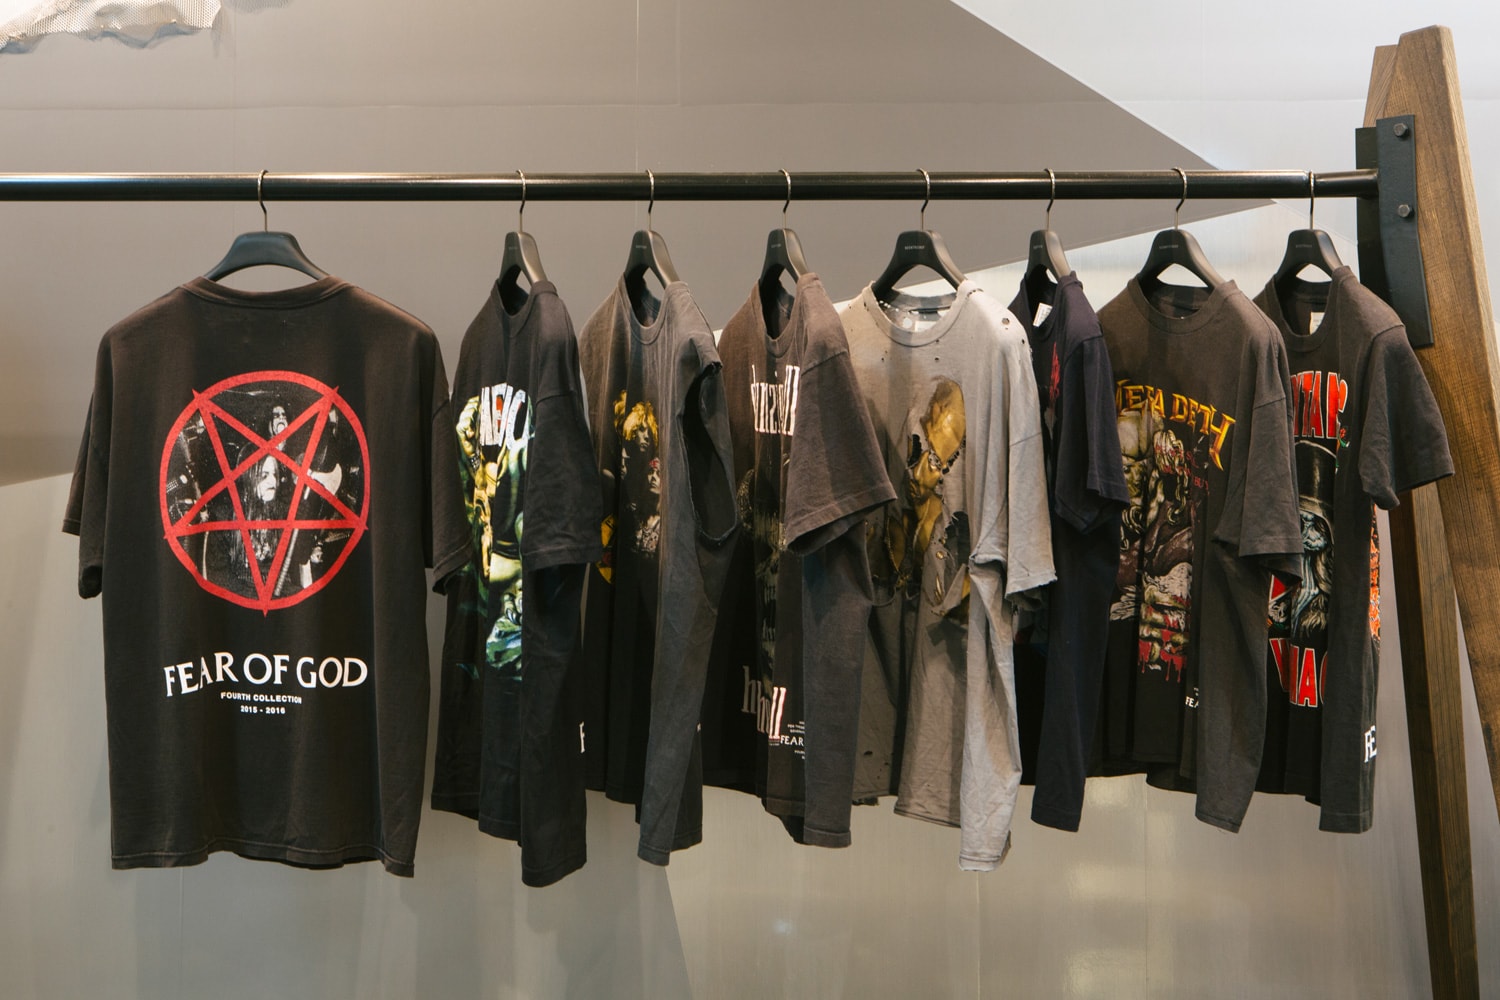 Fear of God x Boon the Shop Resurrected T-Shirt Project